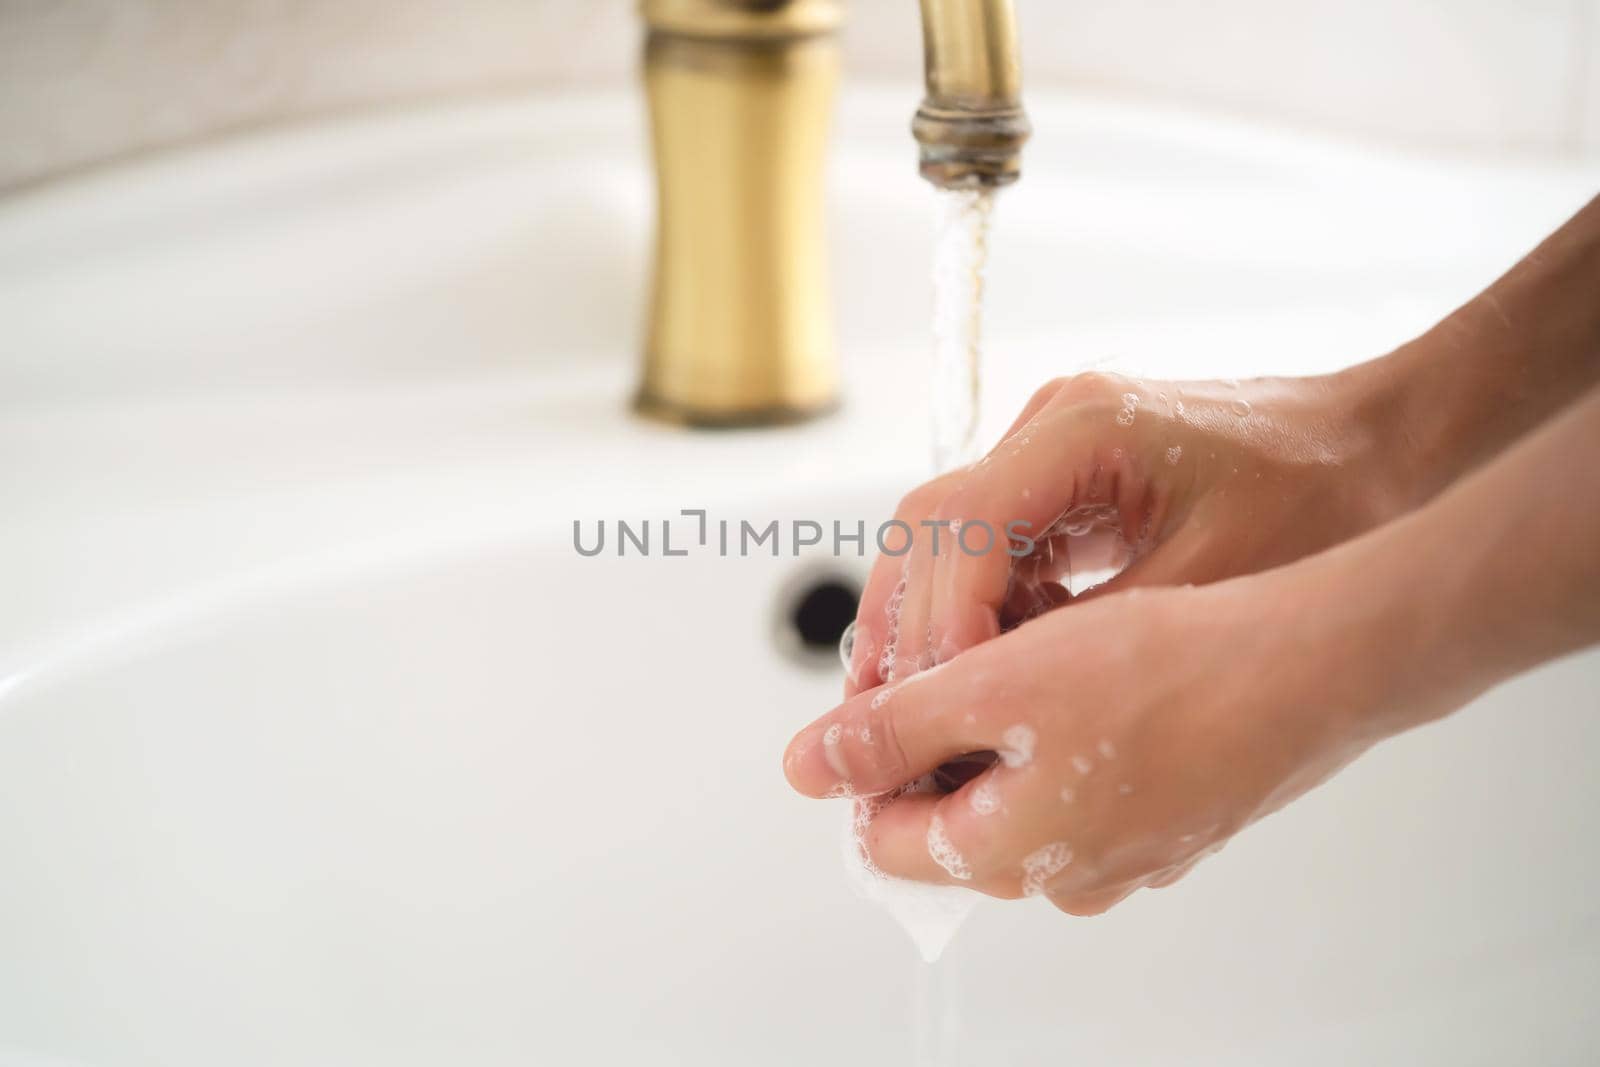 A young girl washes her hands thoroughly with soap under water in the bathroom, close-up view.